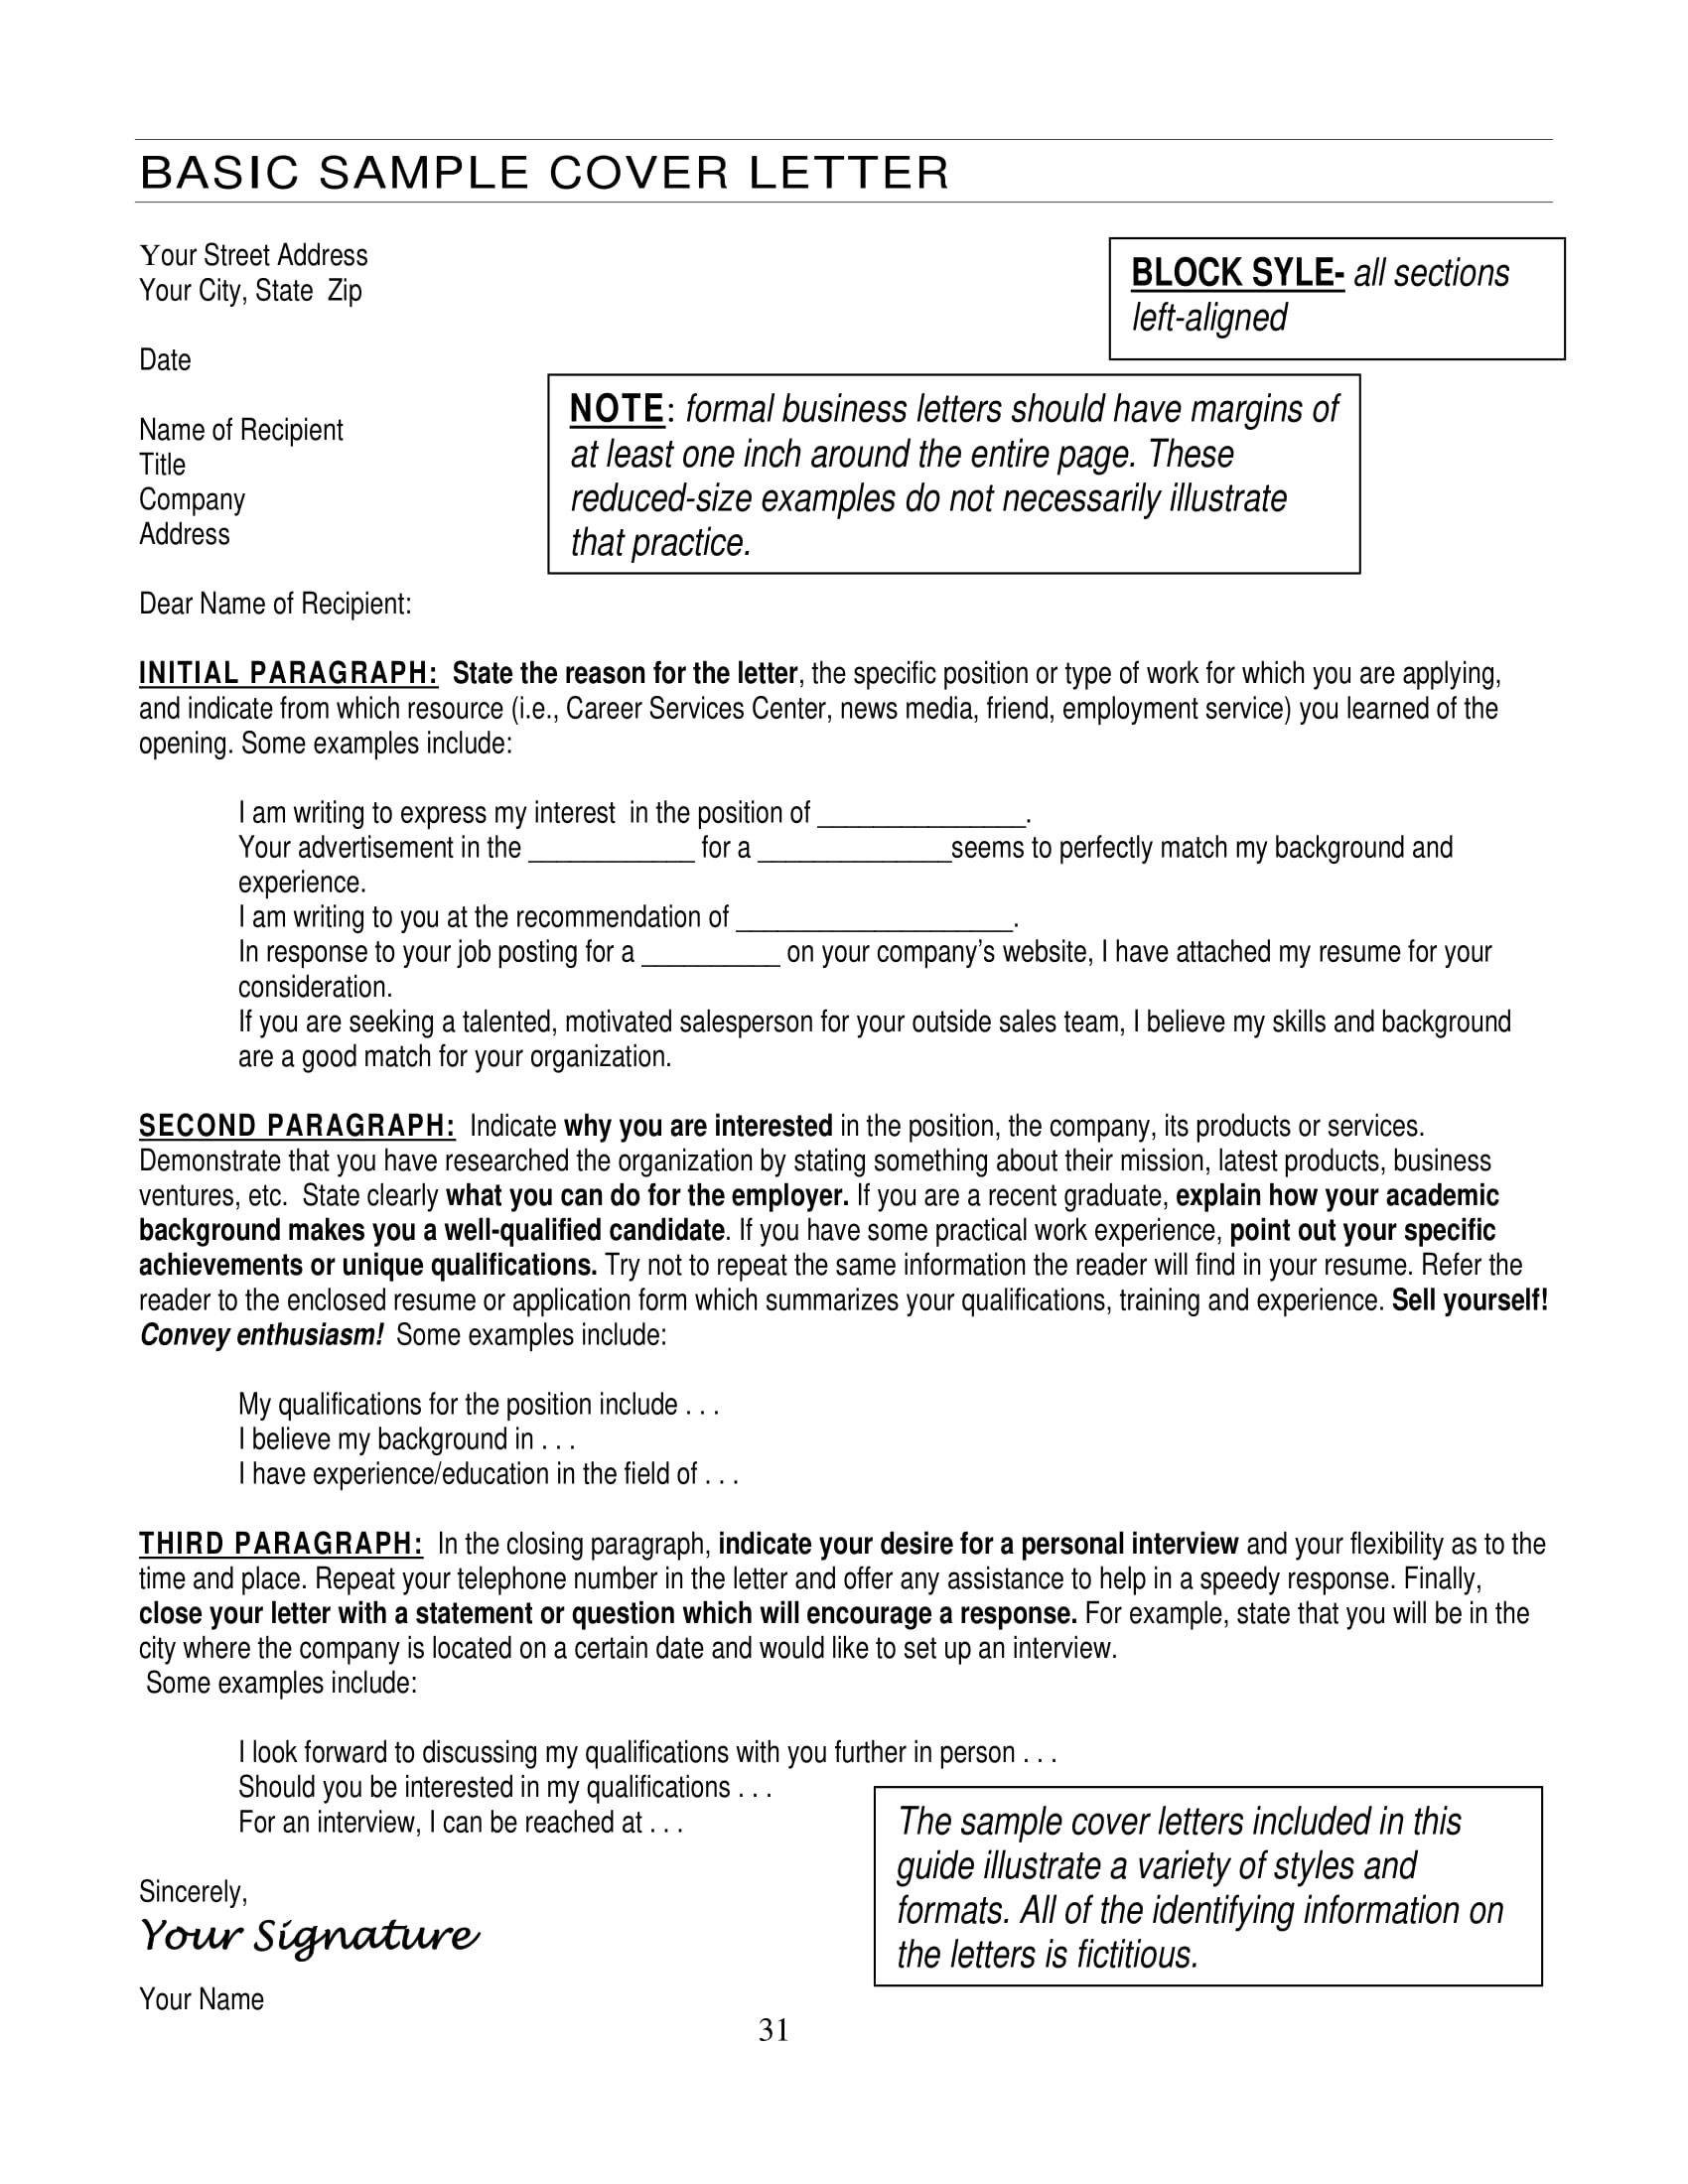 Samples Of Cover Letter For Job Application from images.examples.com